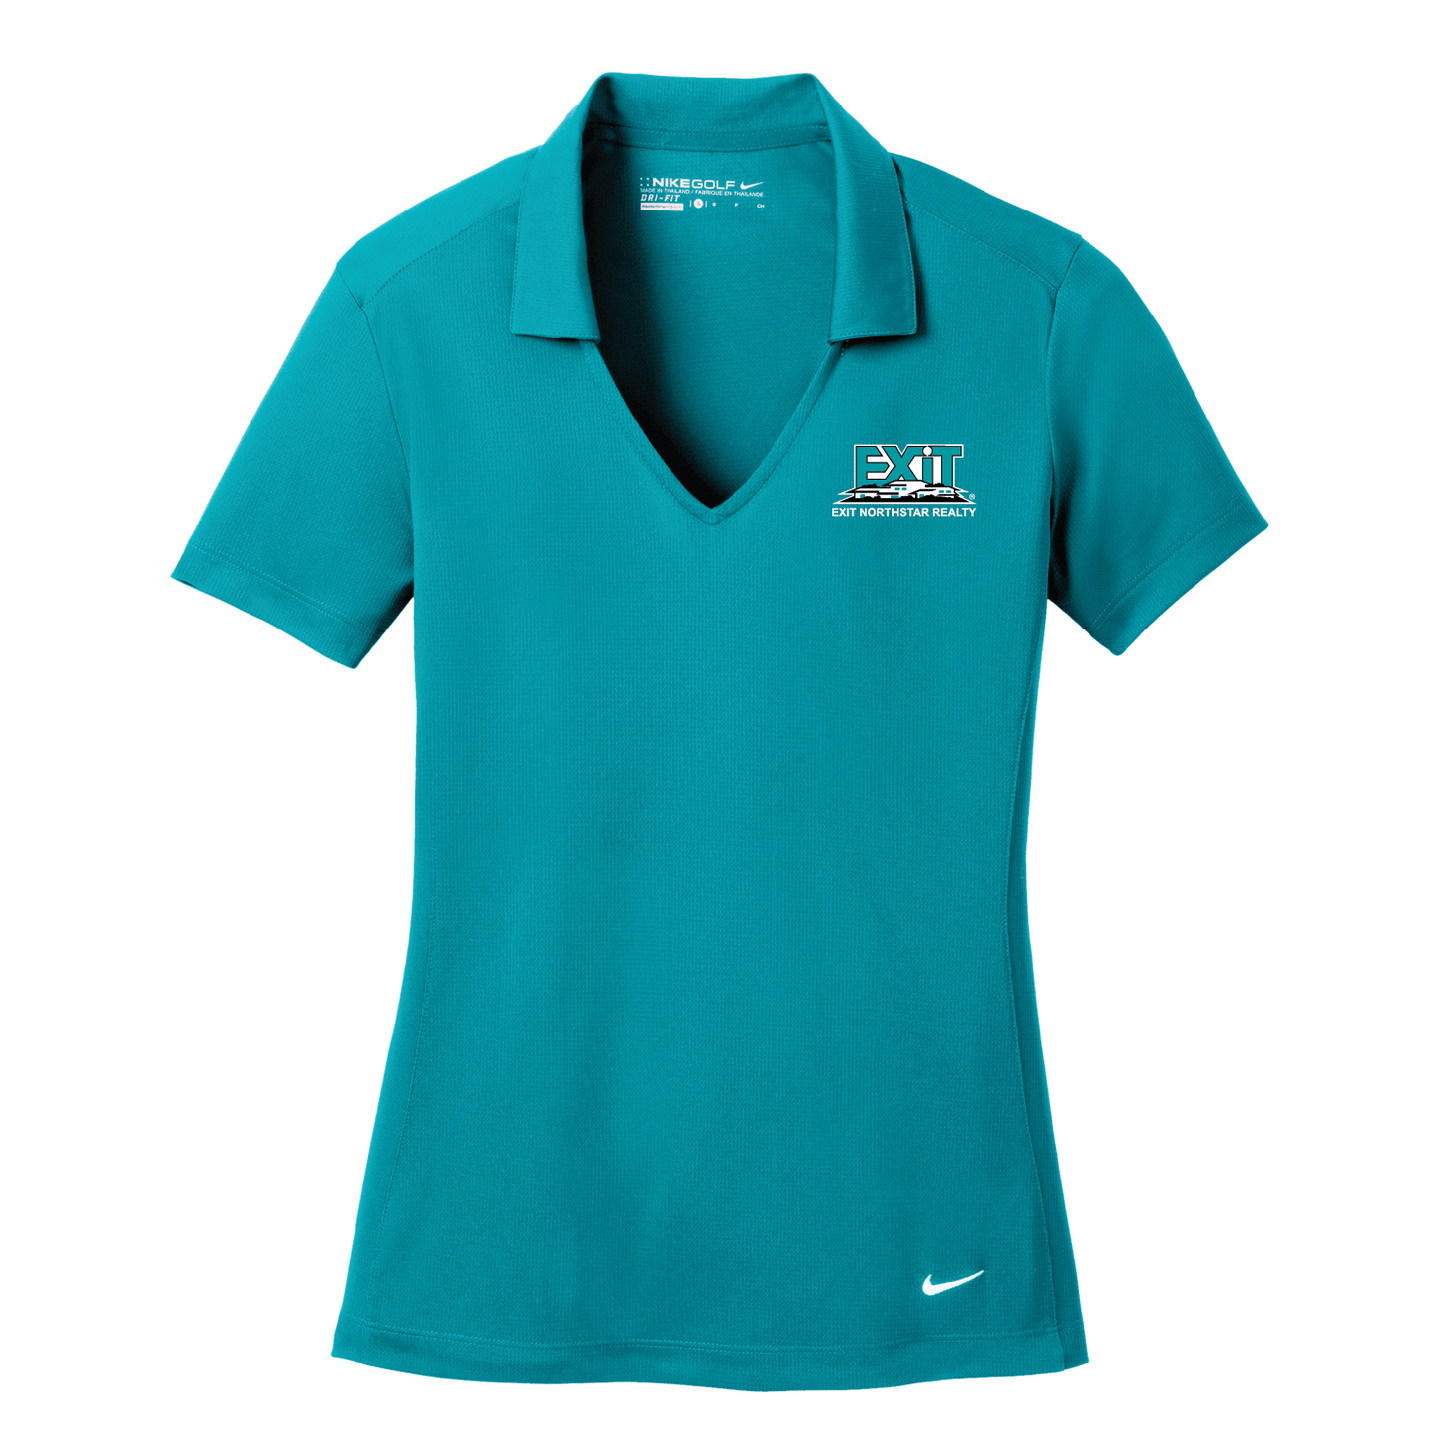 Exit Northstar Realty Women's Nike Polo - DSP On Demand